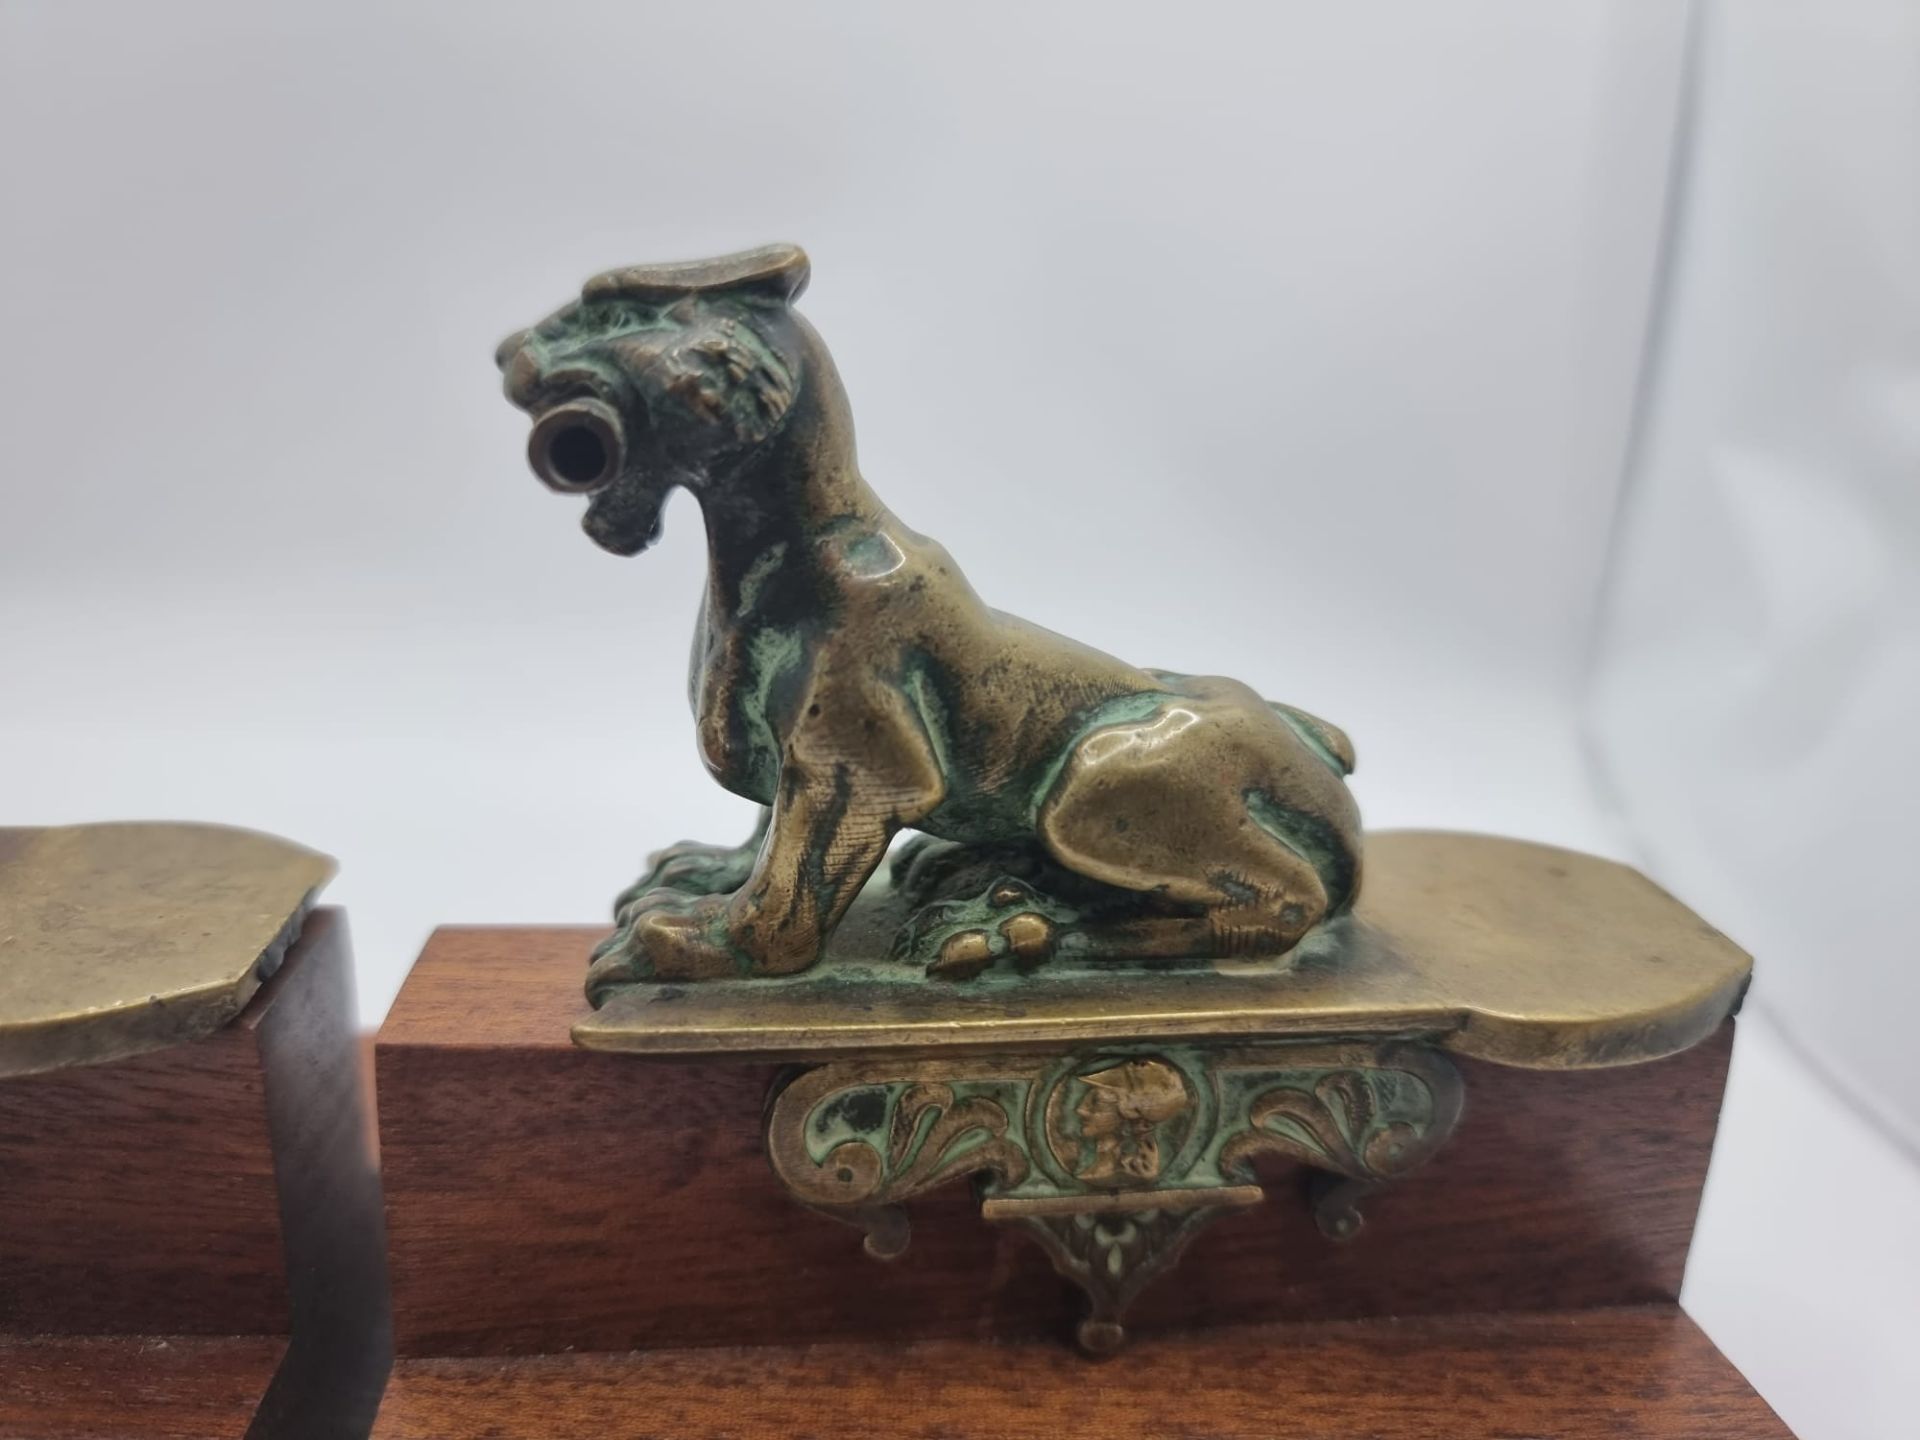 Pair Of 19th Century Decorative Bronze Lions later added to wooden plinth thus converted as Bookends - Image 5 of 10